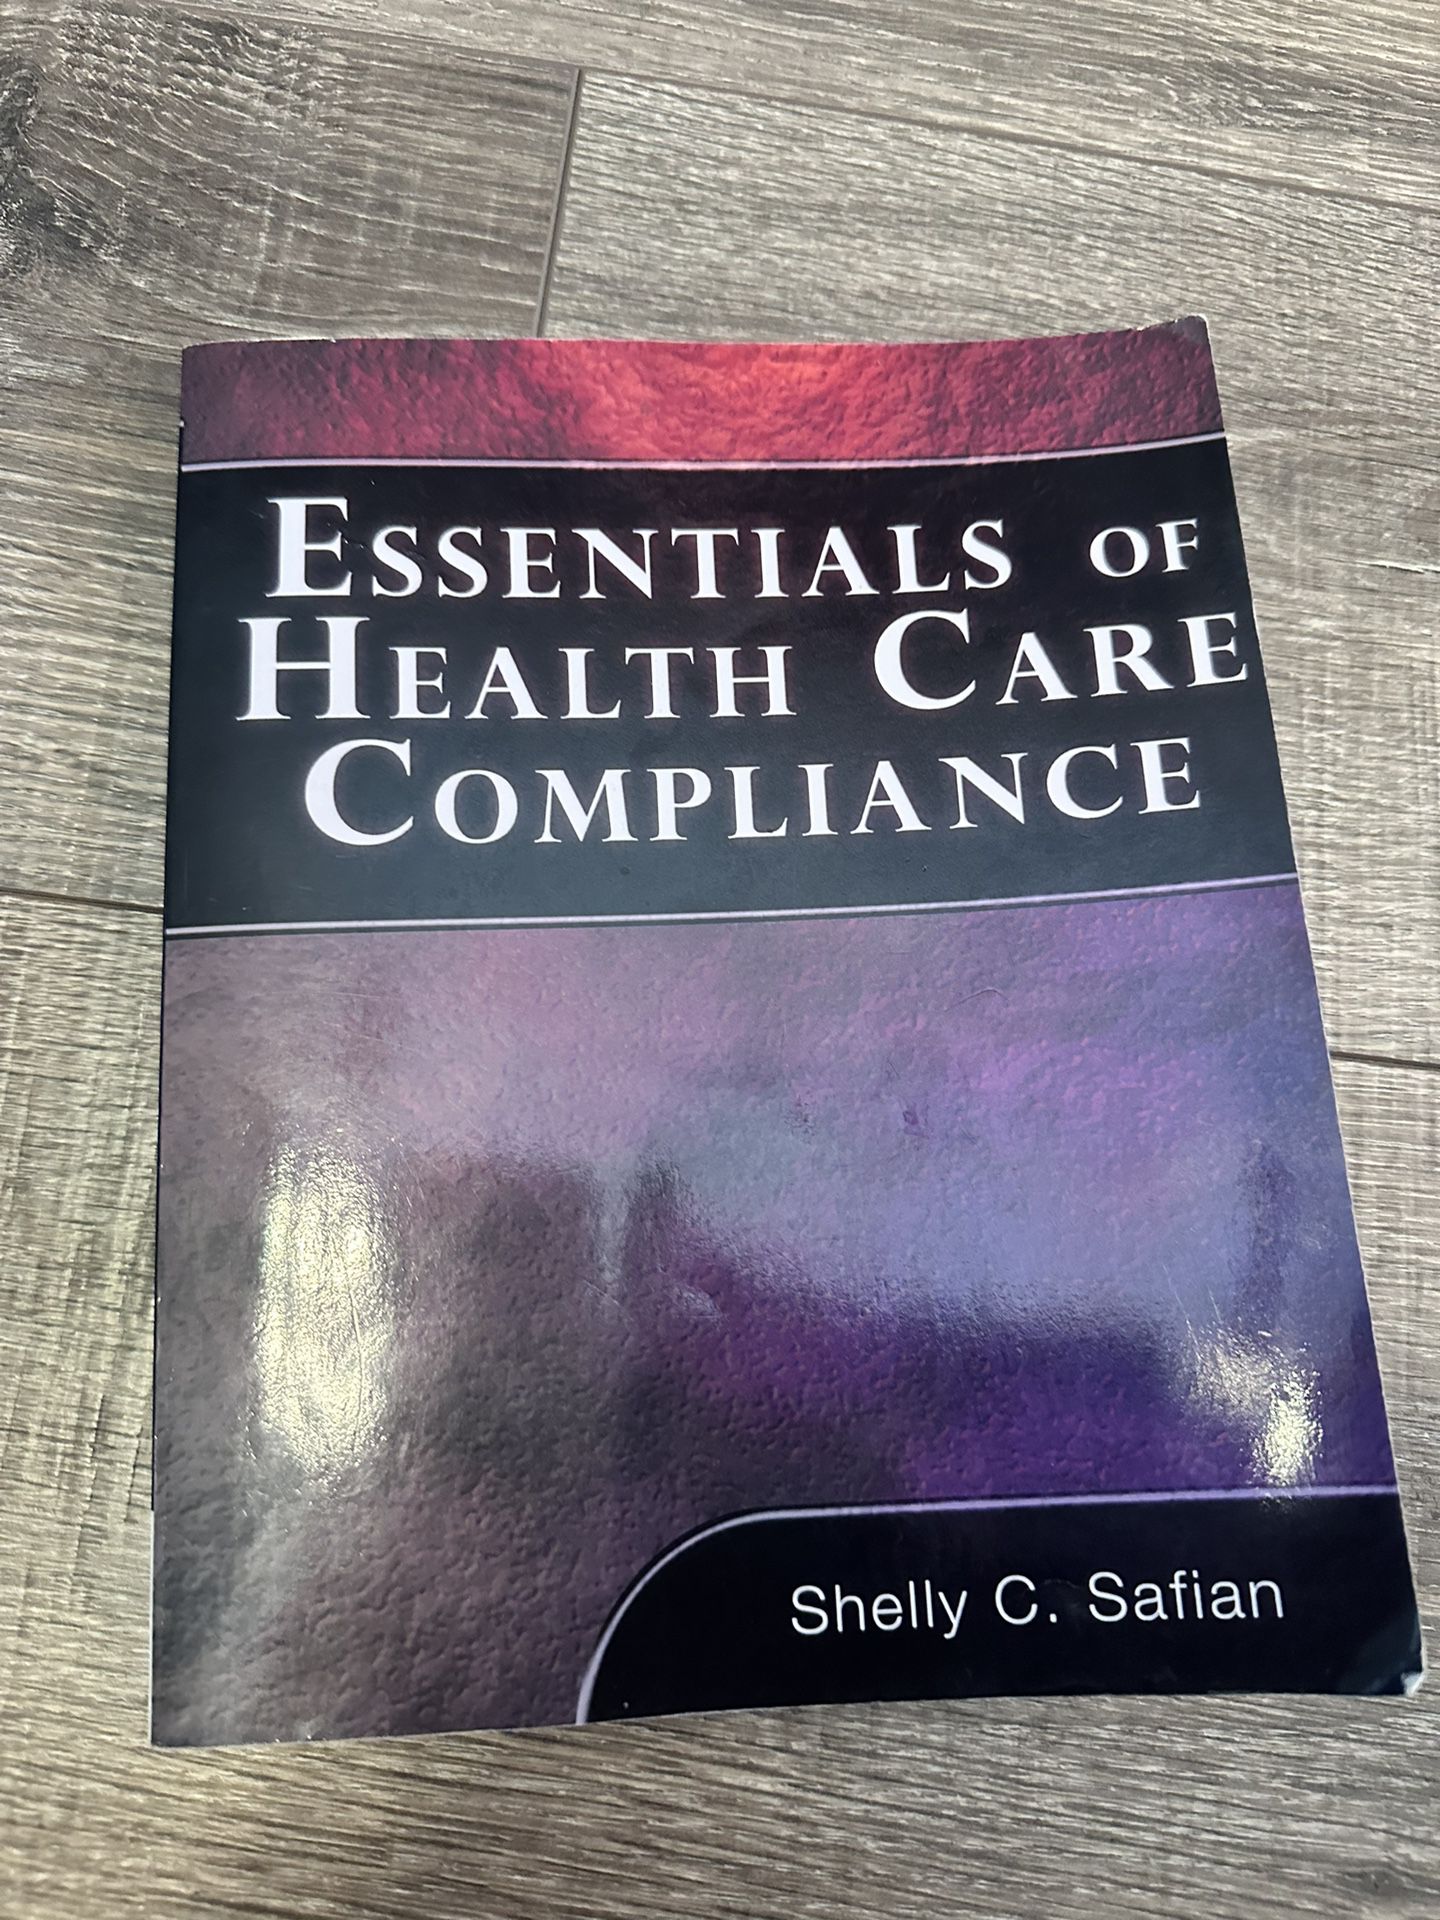 Book: Essentials Of Health Care Compliance